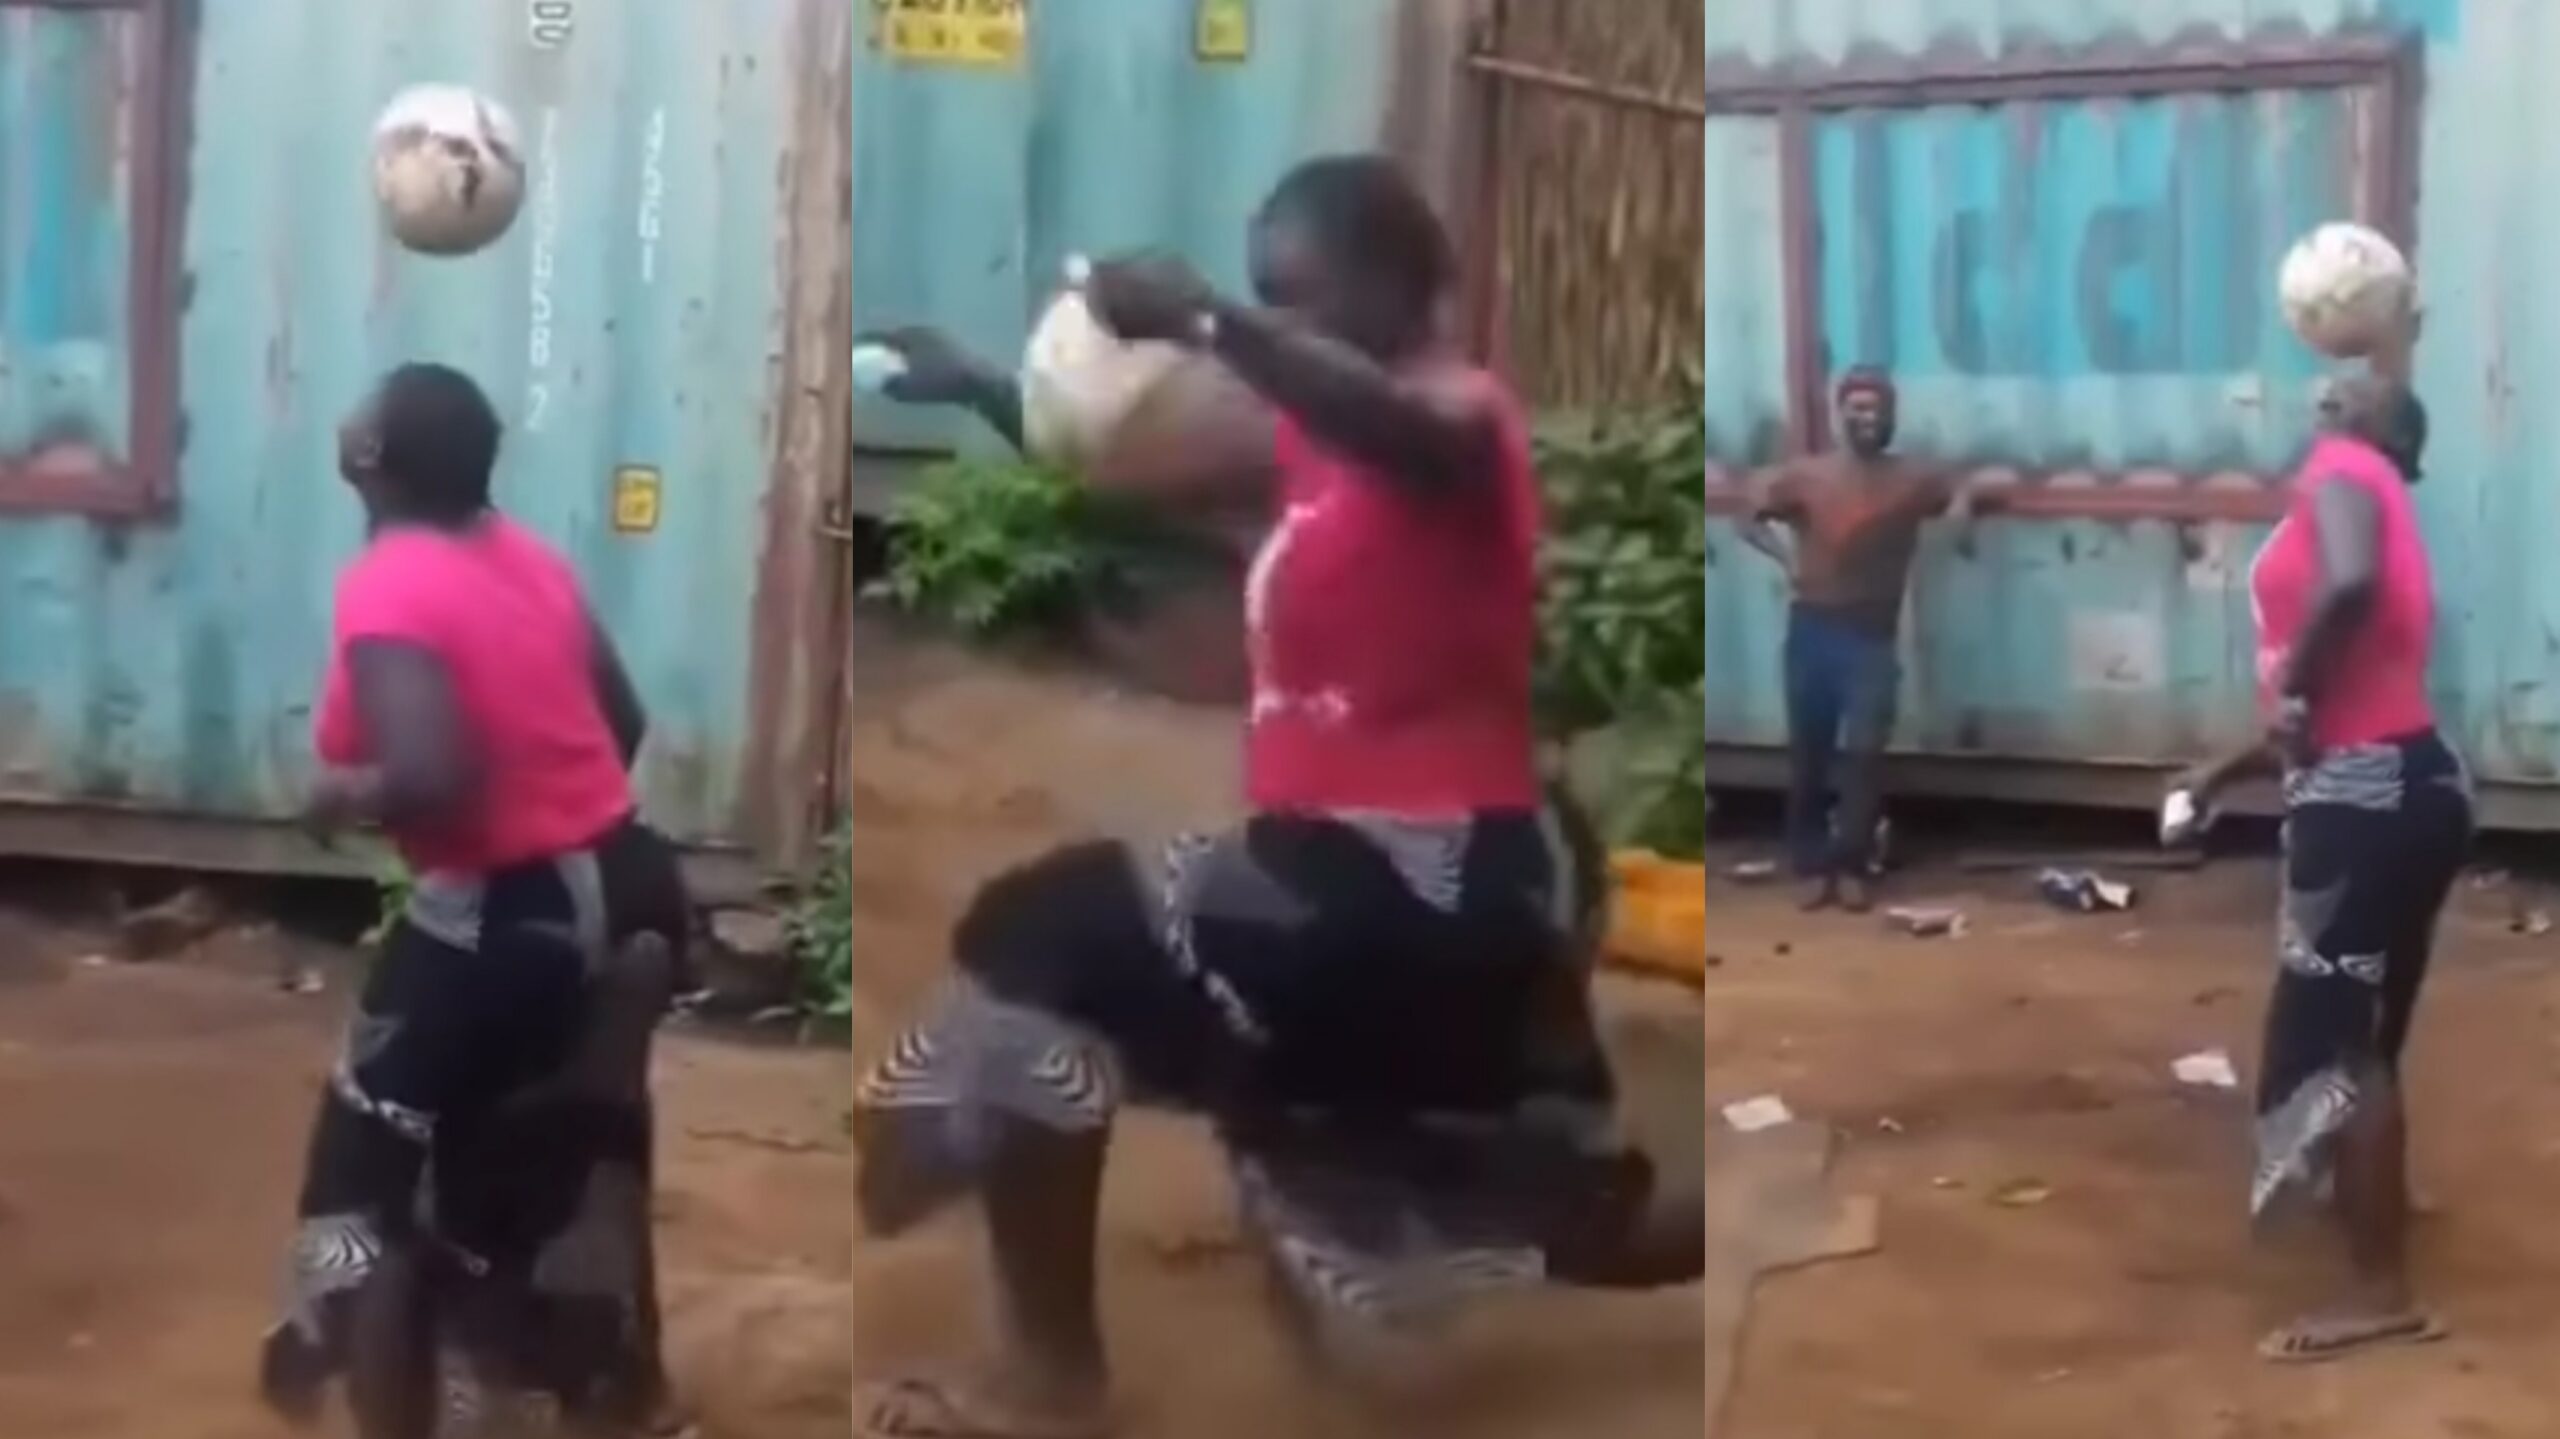 Mother Shows Off Impressive Football Skills While The Men Stood And Watched